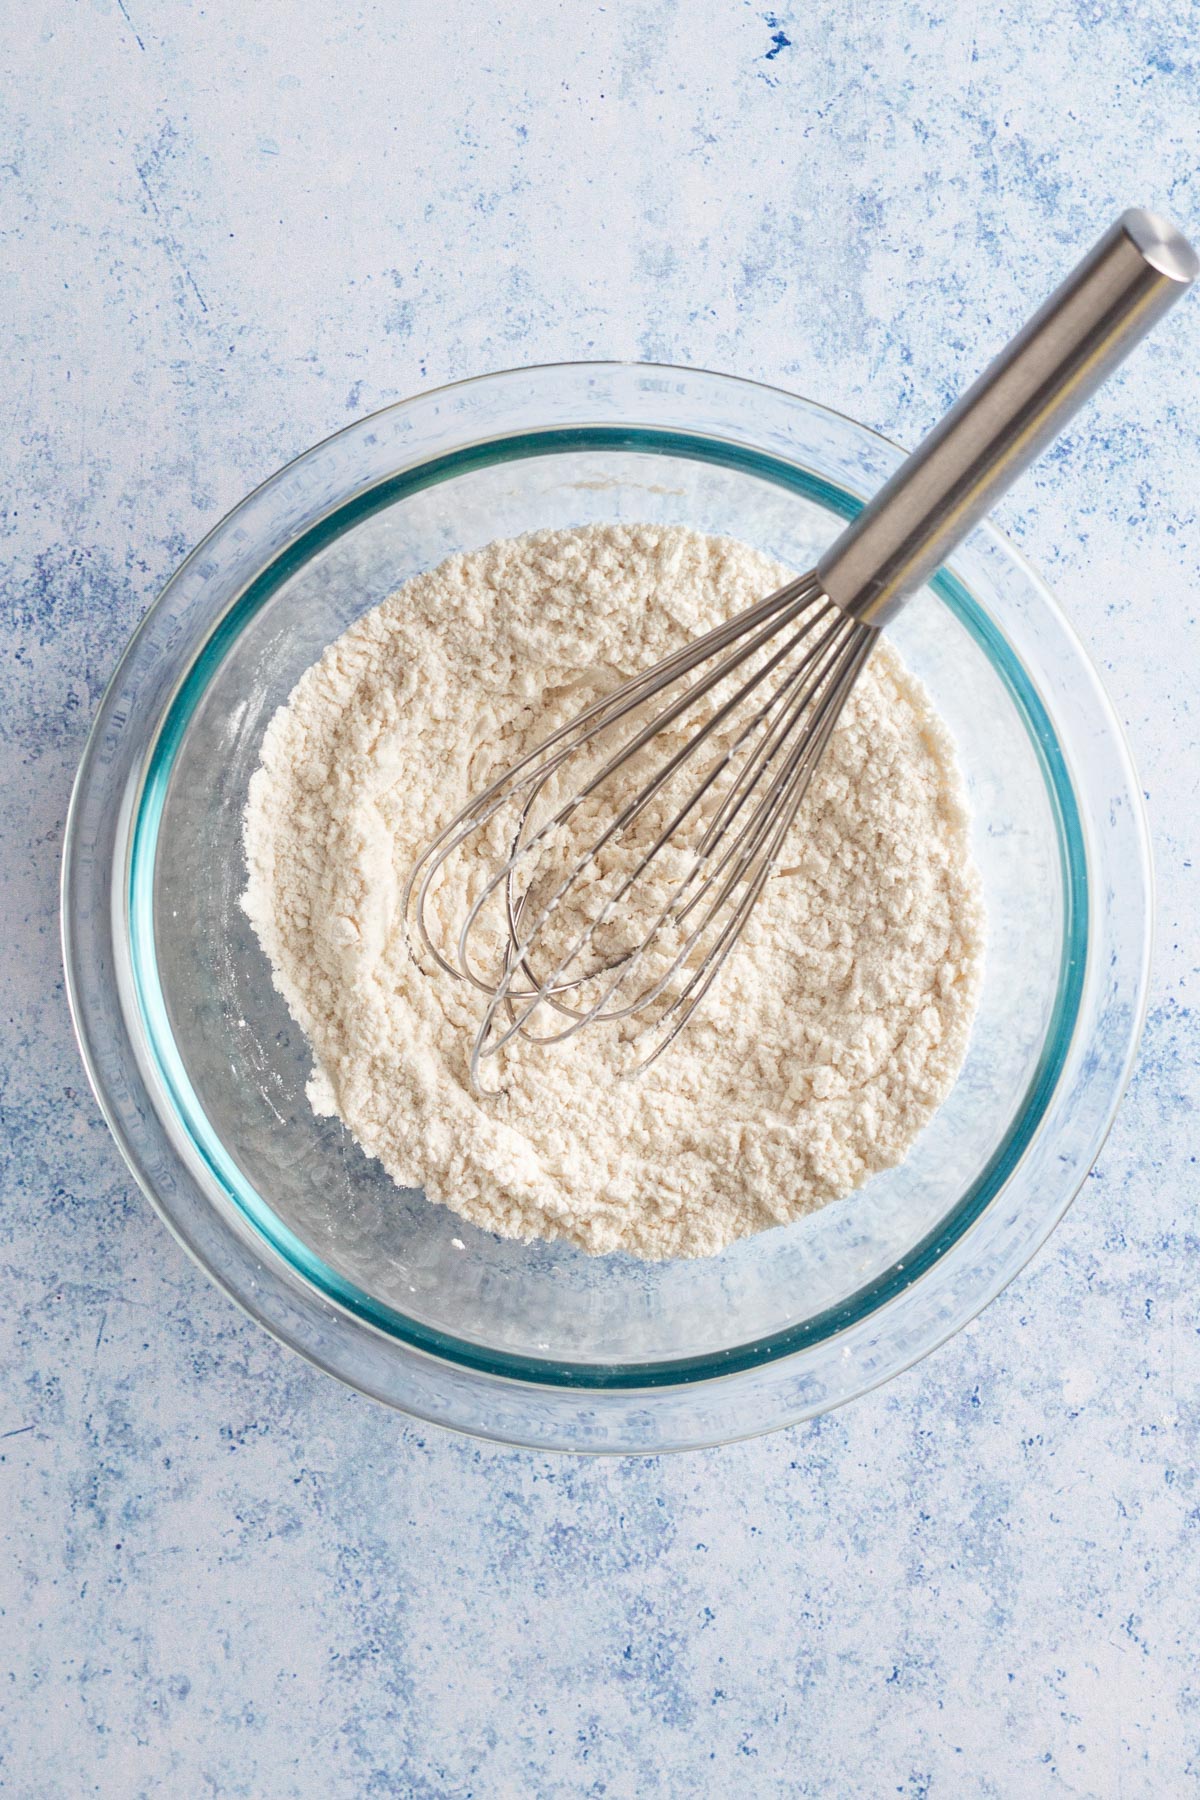 Dry ingredients in a glass bowl with a whisk.